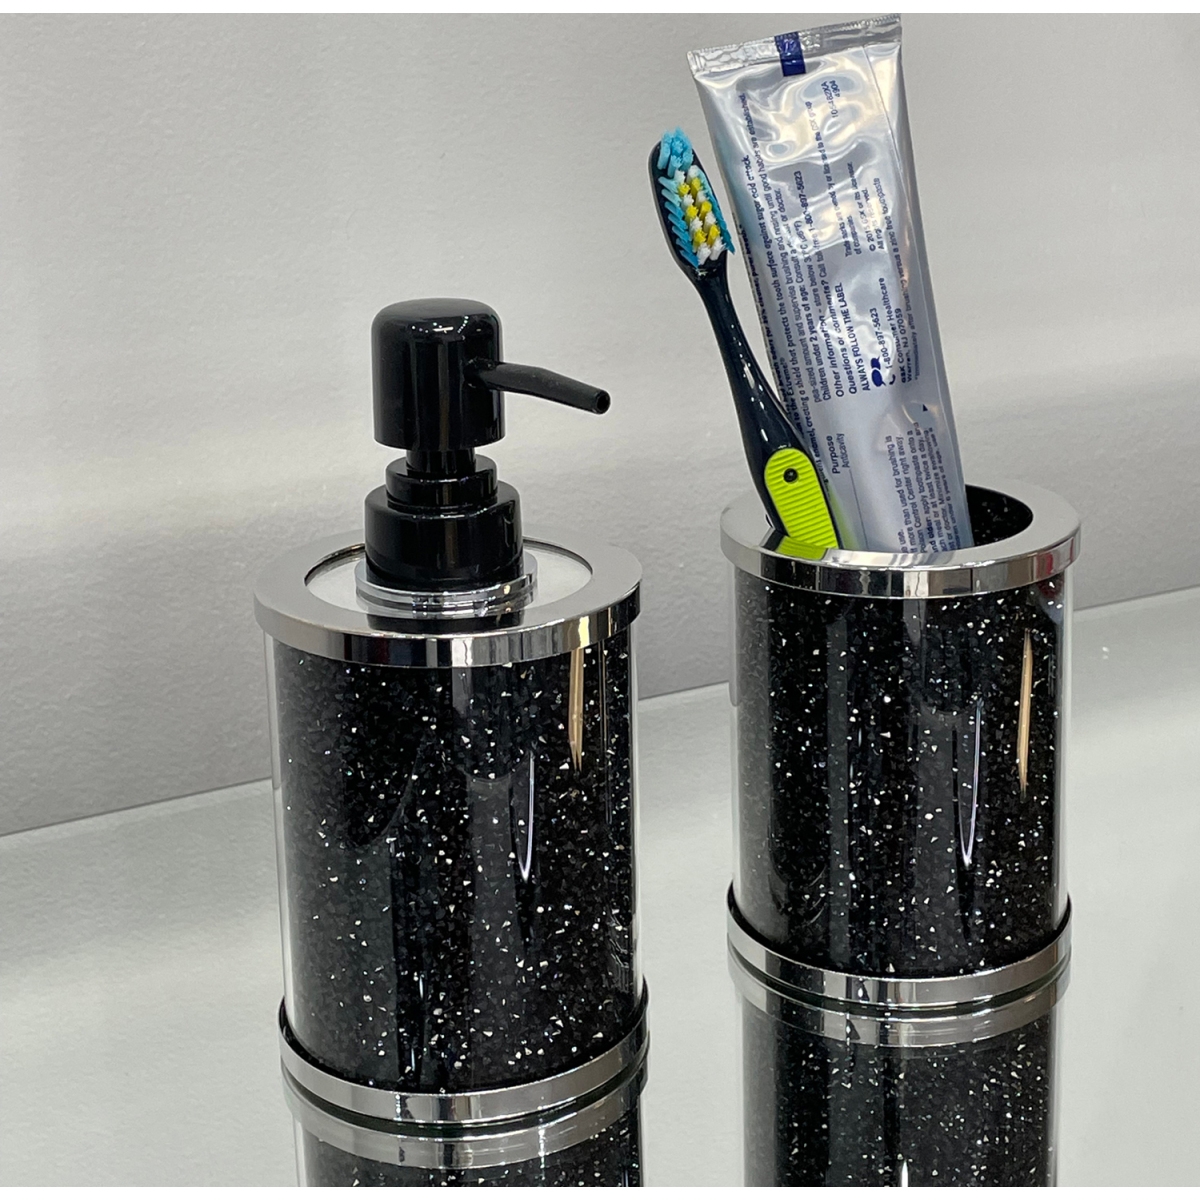 Exquisite 2 Piece Soap Dispenser And Toothbrush Holder In Gift Box - Black